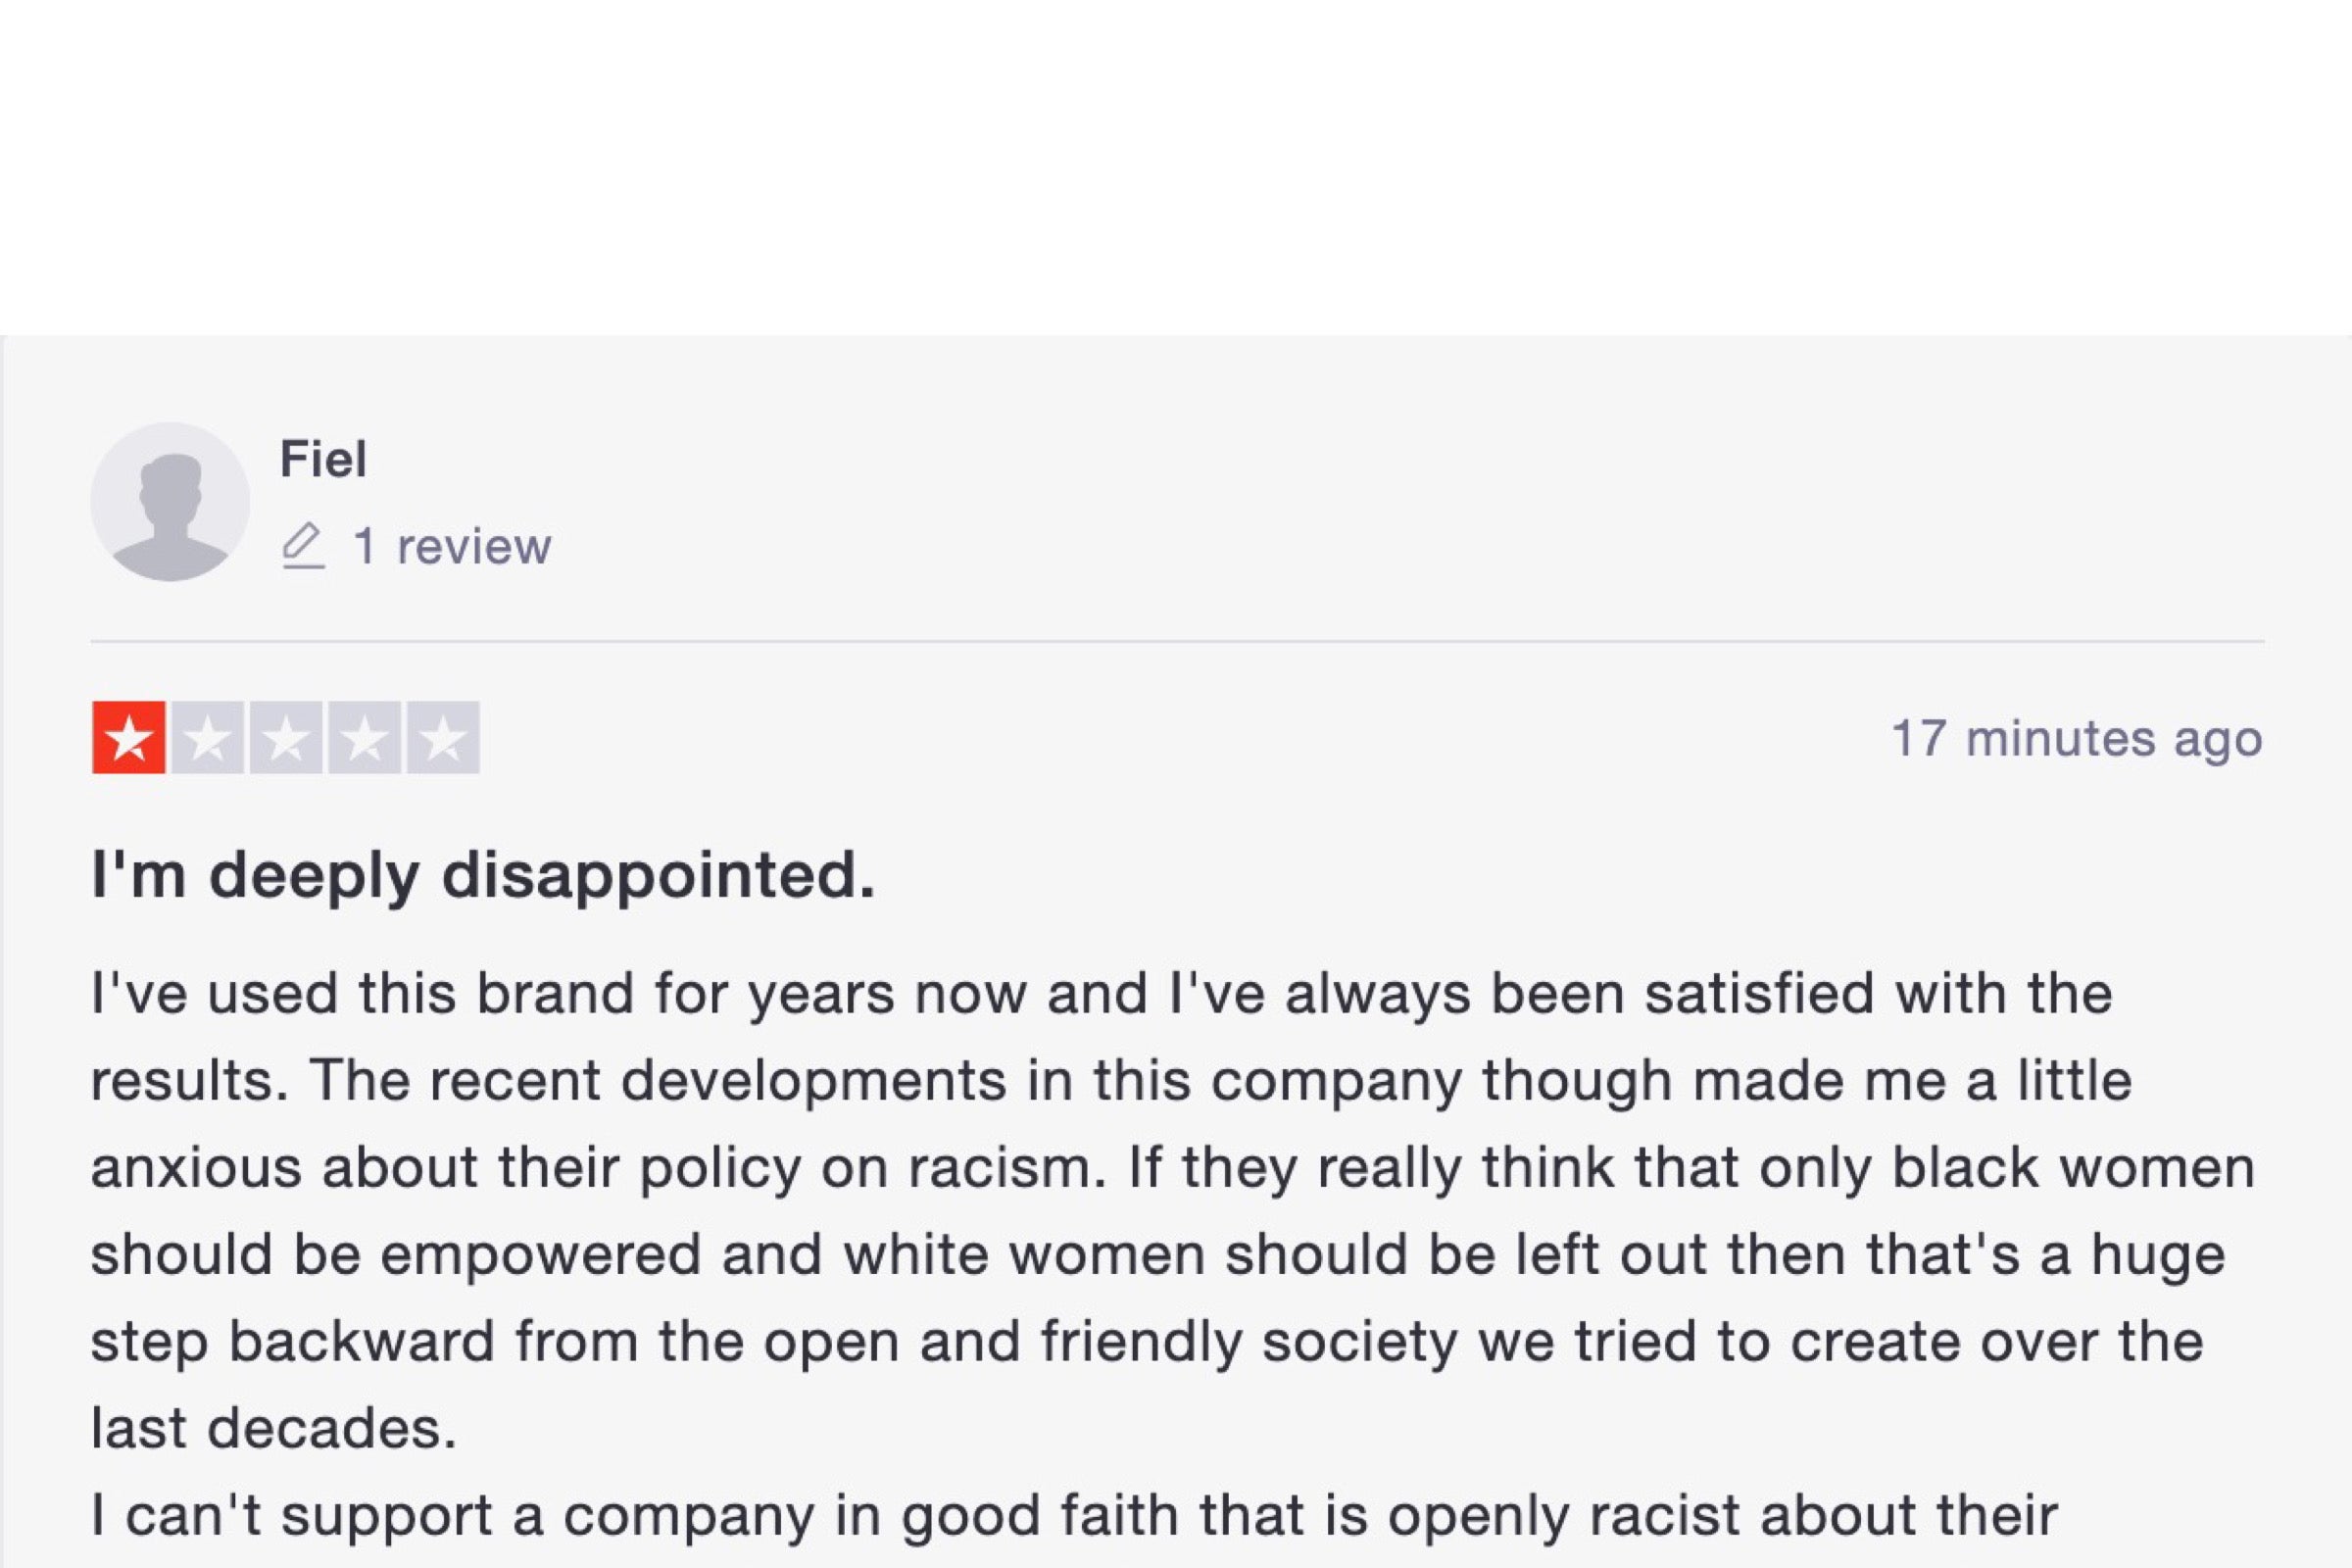 A screenshot of a malicious comment left on the Trustpilot page for the Honey Pot.